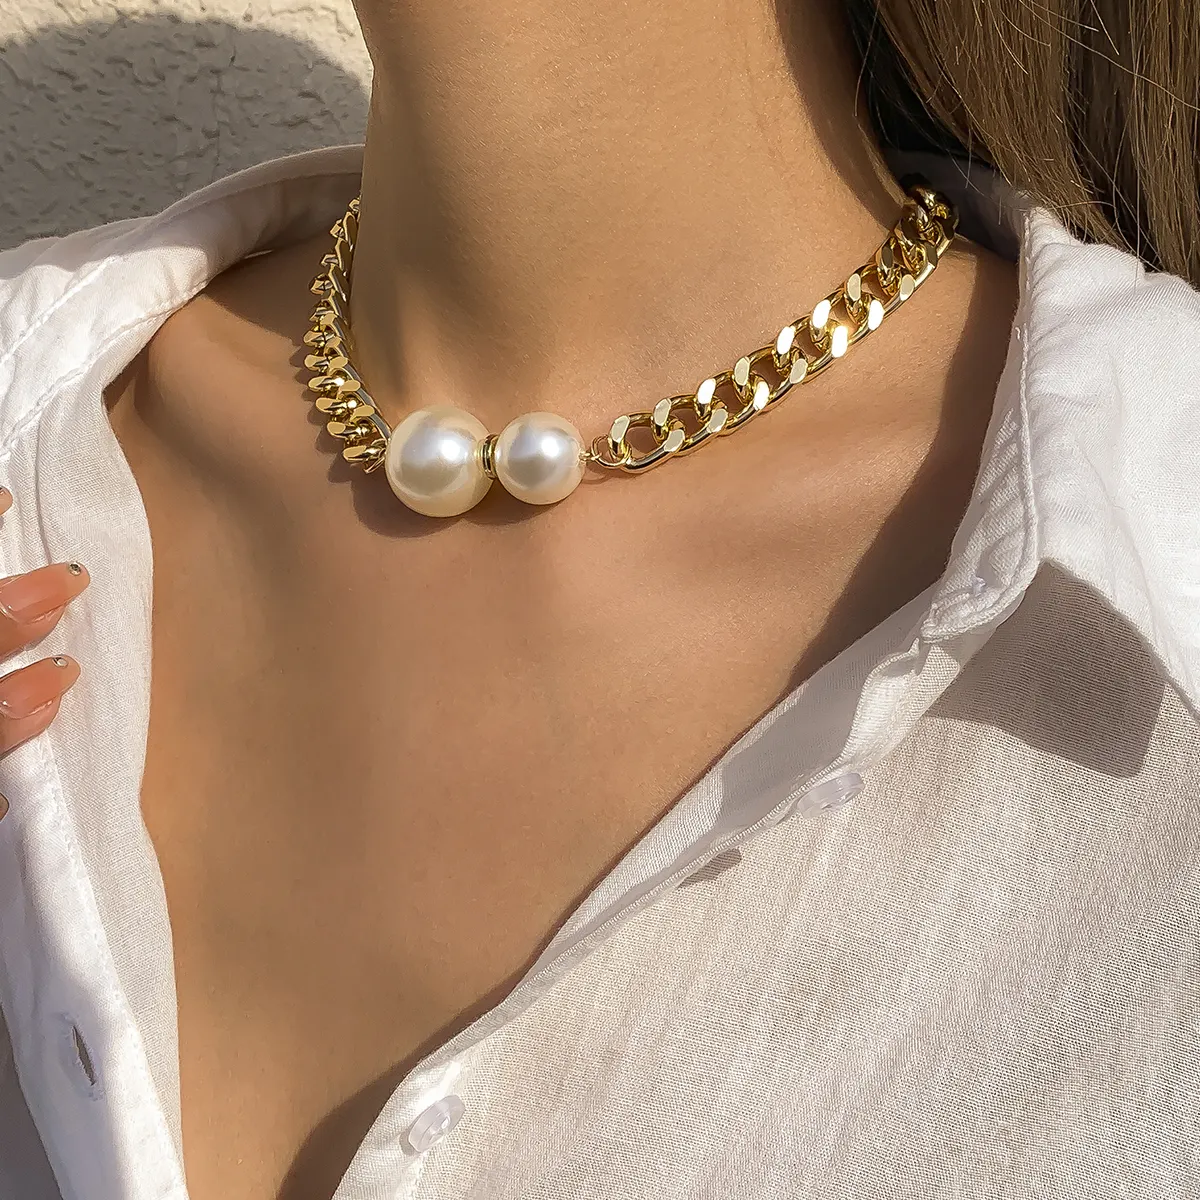 SHIXIN Hot Sale Punk Link Chain Necklace Classic White Baroque Pearl Necklace Gold Silver Choker Necklace Jewelry Men Women